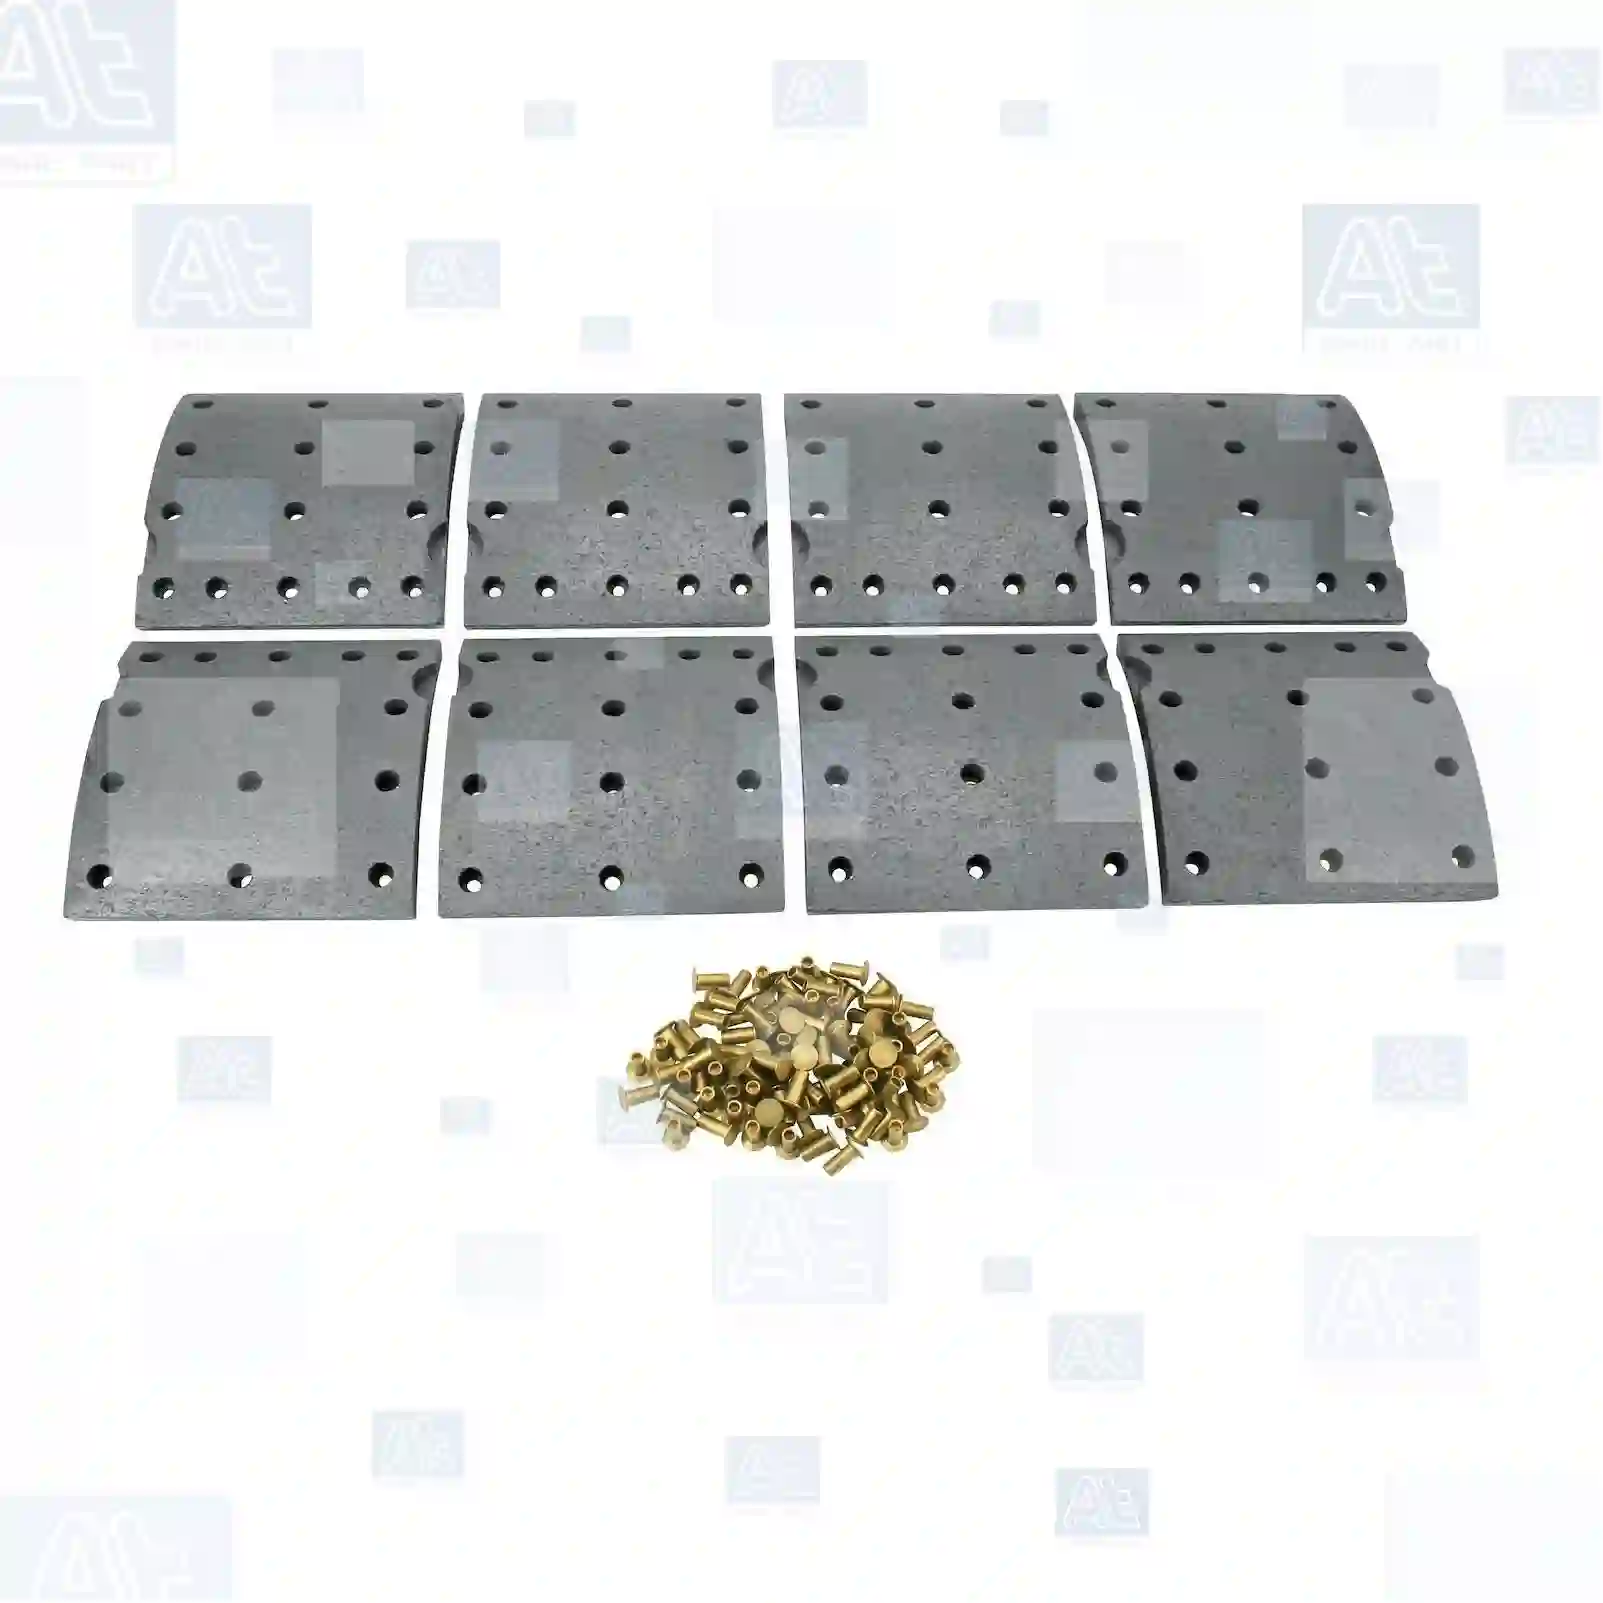 Drum brake lining kit, axle kit, 77717433, 5001868087, 7421534374, MBLK1180, 21534097, 21534097S, 270518, 270518S, 270834, 270834S, 2708345, 270940, 270940S, 2709400, 270974, 270974S, 2709749, 275994, 275994S, 3090347, 3090347S, 3091456, 3091456S, 3095167, 3095167S, 3095177, 3095177S, 3095187, 3095187S, ZG50448-0008 ||  77717433 At Spare Part | Engine, Accelerator Pedal, Camshaft, Connecting Rod, Crankcase, Crankshaft, Cylinder Head, Engine Suspension Mountings, Exhaust Manifold, Exhaust Gas Recirculation, Filter Kits, Flywheel Housing, General Overhaul Kits, Engine, Intake Manifold, Oil Cleaner, Oil Cooler, Oil Filter, Oil Pump, Oil Sump, Piston & Liner, Sensor & Switch, Timing Case, Turbocharger, Cooling System, Belt Tensioner, Coolant Filter, Coolant Pipe, Corrosion Prevention Agent, Drive, Expansion Tank, Fan, Intercooler, Monitors & Gauges, Radiator, Thermostat, V-Belt / Timing belt, Water Pump, Fuel System, Electronical Injector Unit, Feed Pump, Fuel Filter, cpl., Fuel Gauge Sender,  Fuel Line, Fuel Pump, Fuel Tank, Injection Line Kit, Injection Pump, Exhaust System, Clutch & Pedal, Gearbox, Propeller Shaft, Axles, Brake System, Hubs & Wheels, Suspension, Leaf Spring, Universal Parts / Accessories, Steering, Electrical System, Cabin Drum brake lining kit, axle kit, 77717433, 5001868087, 7421534374, MBLK1180, 21534097, 21534097S, 270518, 270518S, 270834, 270834S, 2708345, 270940, 270940S, 2709400, 270974, 270974S, 2709749, 275994, 275994S, 3090347, 3090347S, 3091456, 3091456S, 3095167, 3095167S, 3095177, 3095177S, 3095187, 3095187S, ZG50448-0008 ||  77717433 At Spare Part | Engine, Accelerator Pedal, Camshaft, Connecting Rod, Crankcase, Crankshaft, Cylinder Head, Engine Suspension Mountings, Exhaust Manifold, Exhaust Gas Recirculation, Filter Kits, Flywheel Housing, General Overhaul Kits, Engine, Intake Manifold, Oil Cleaner, Oil Cooler, Oil Filter, Oil Pump, Oil Sump, Piston & Liner, Sensor & Switch, Timing Case, Turbocharger, Cooling System, Belt Tensioner, Coolant Filter, Coolant Pipe, Corrosion Prevention Agent, Drive, Expansion Tank, Fan, Intercooler, Monitors & Gauges, Radiator, Thermostat, V-Belt / Timing belt, Water Pump, Fuel System, Electronical Injector Unit, Feed Pump, Fuel Filter, cpl., Fuel Gauge Sender,  Fuel Line, Fuel Pump, Fuel Tank, Injection Line Kit, Injection Pump, Exhaust System, Clutch & Pedal, Gearbox, Propeller Shaft, Axles, Brake System, Hubs & Wheels, Suspension, Leaf Spring, Universal Parts / Accessories, Steering, Electrical System, Cabin